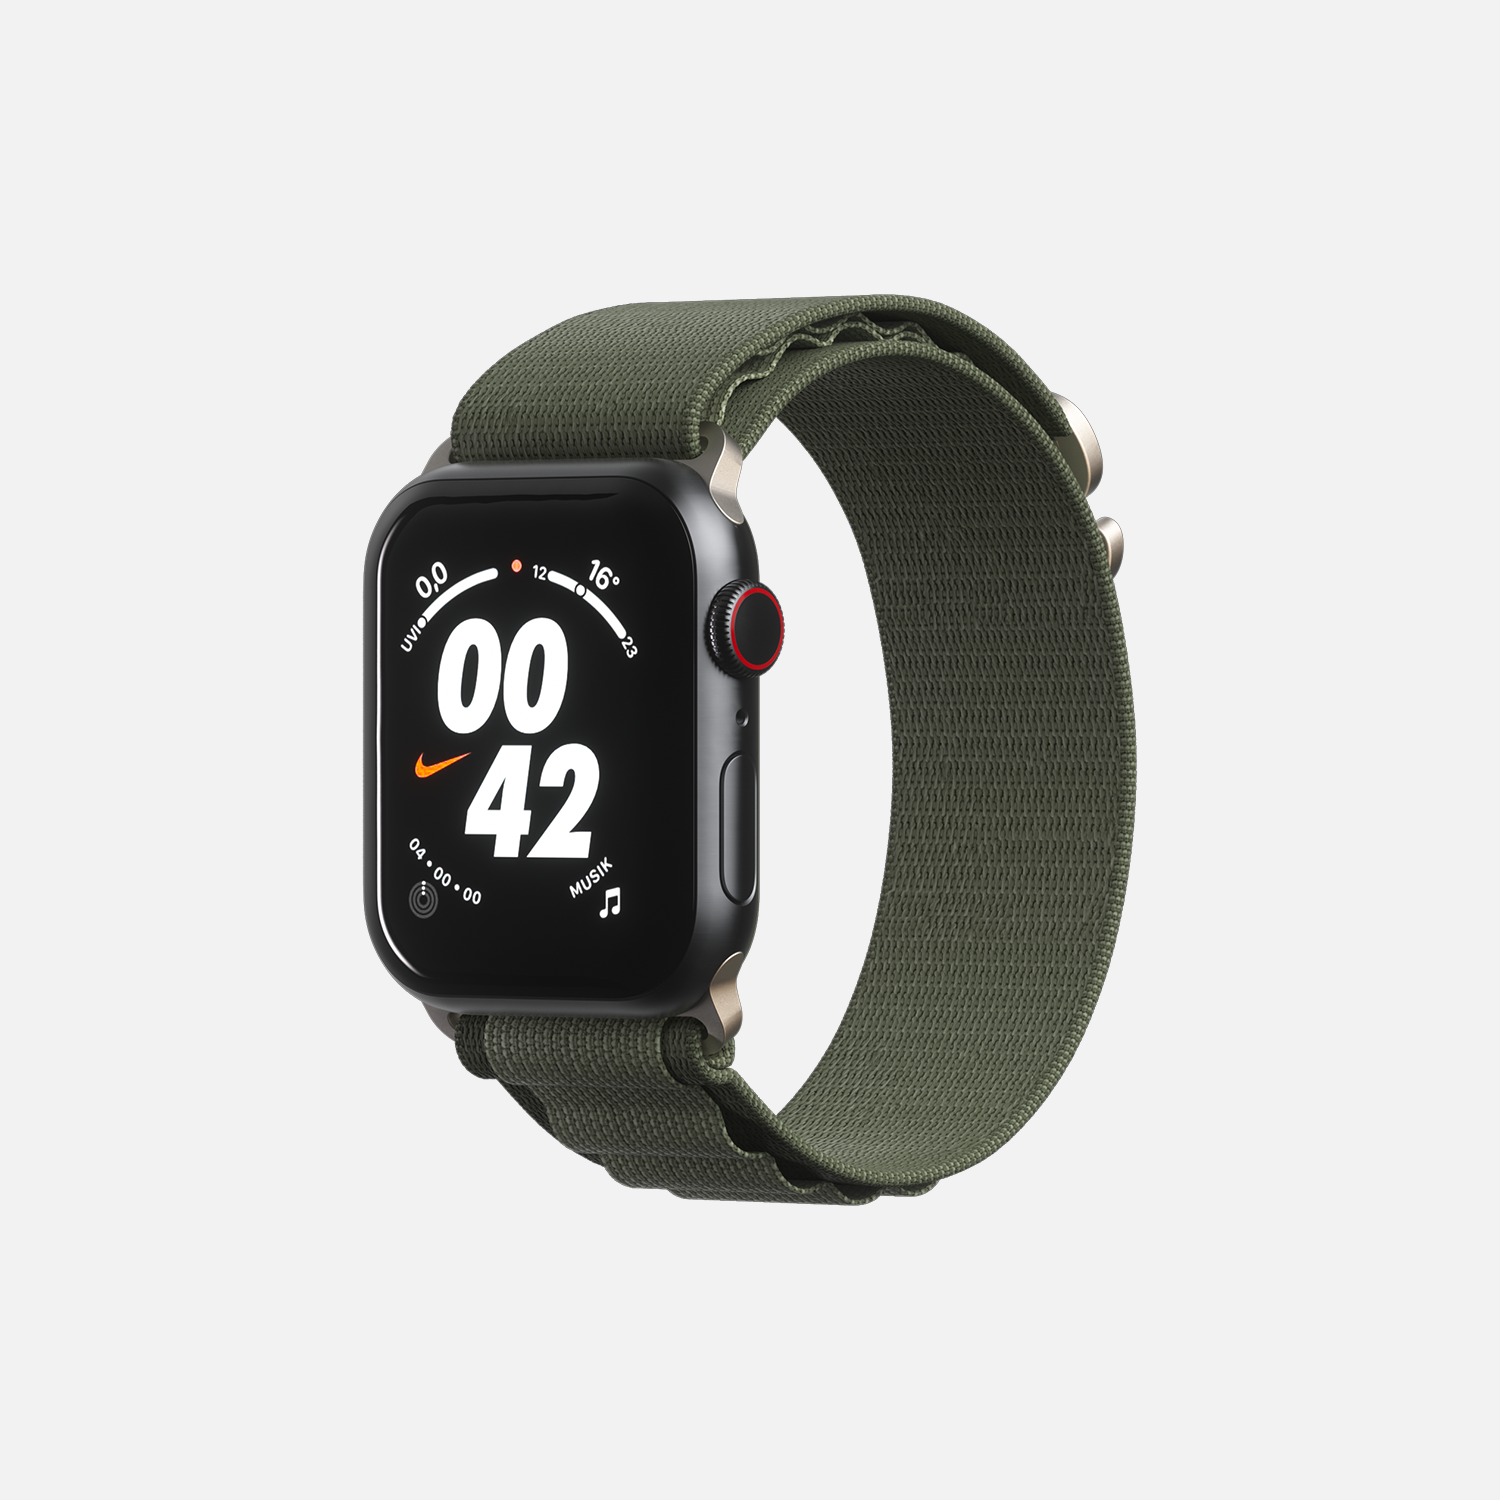 Smartwatch with black display showing time and Nike logo, sage green sport band, on a white background.